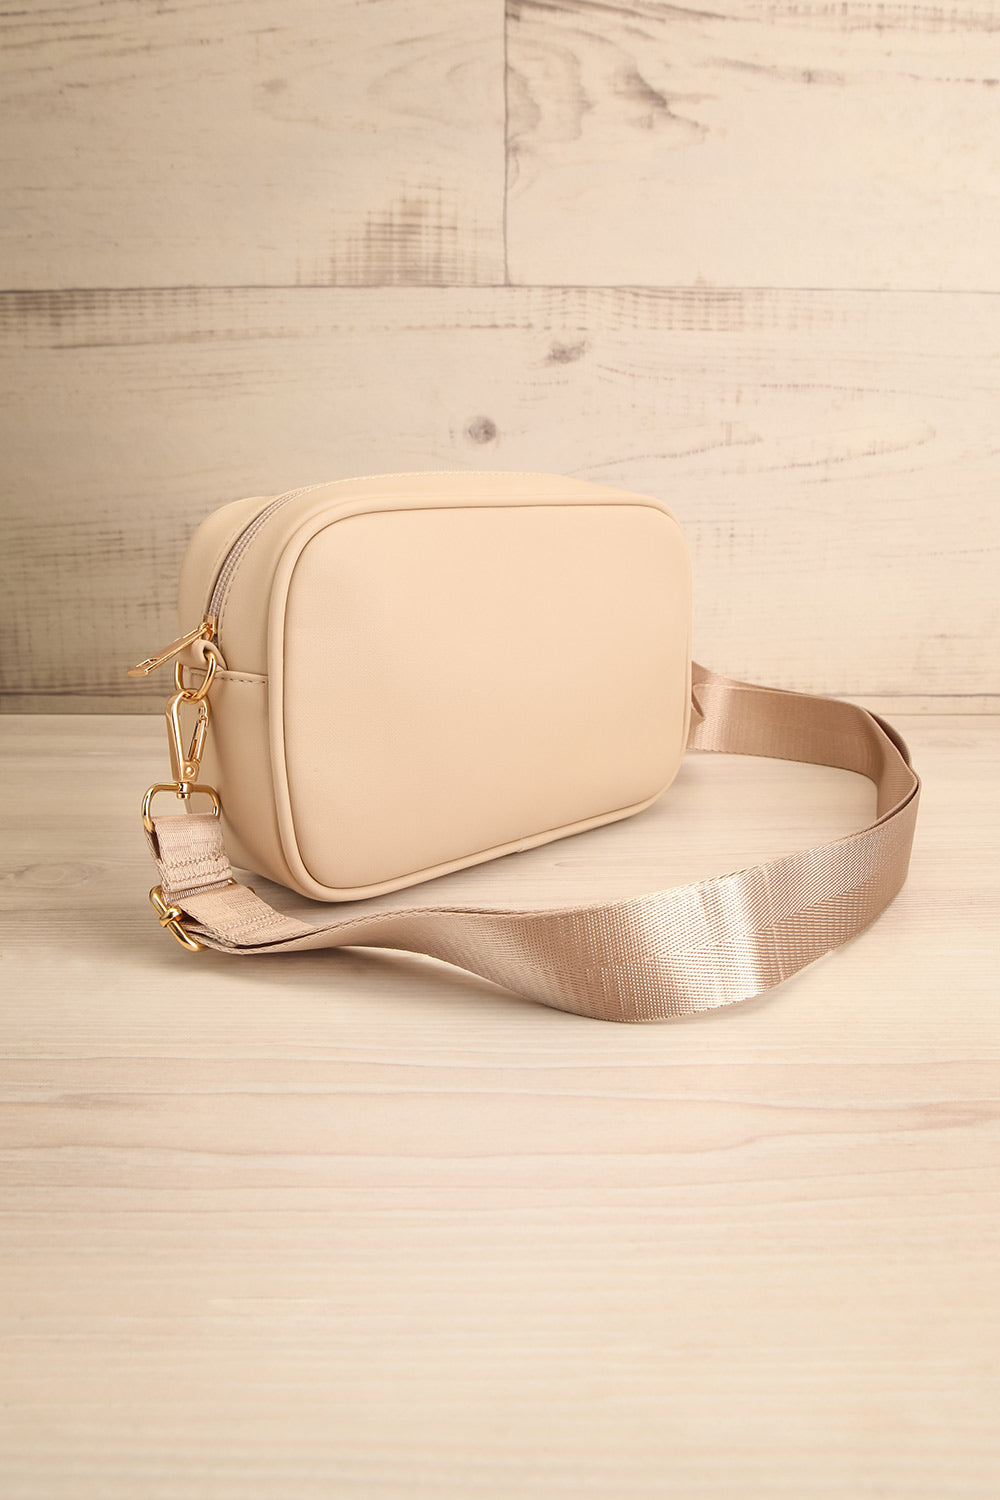 Dianoia Beige Faux Leather Crossbody Bag